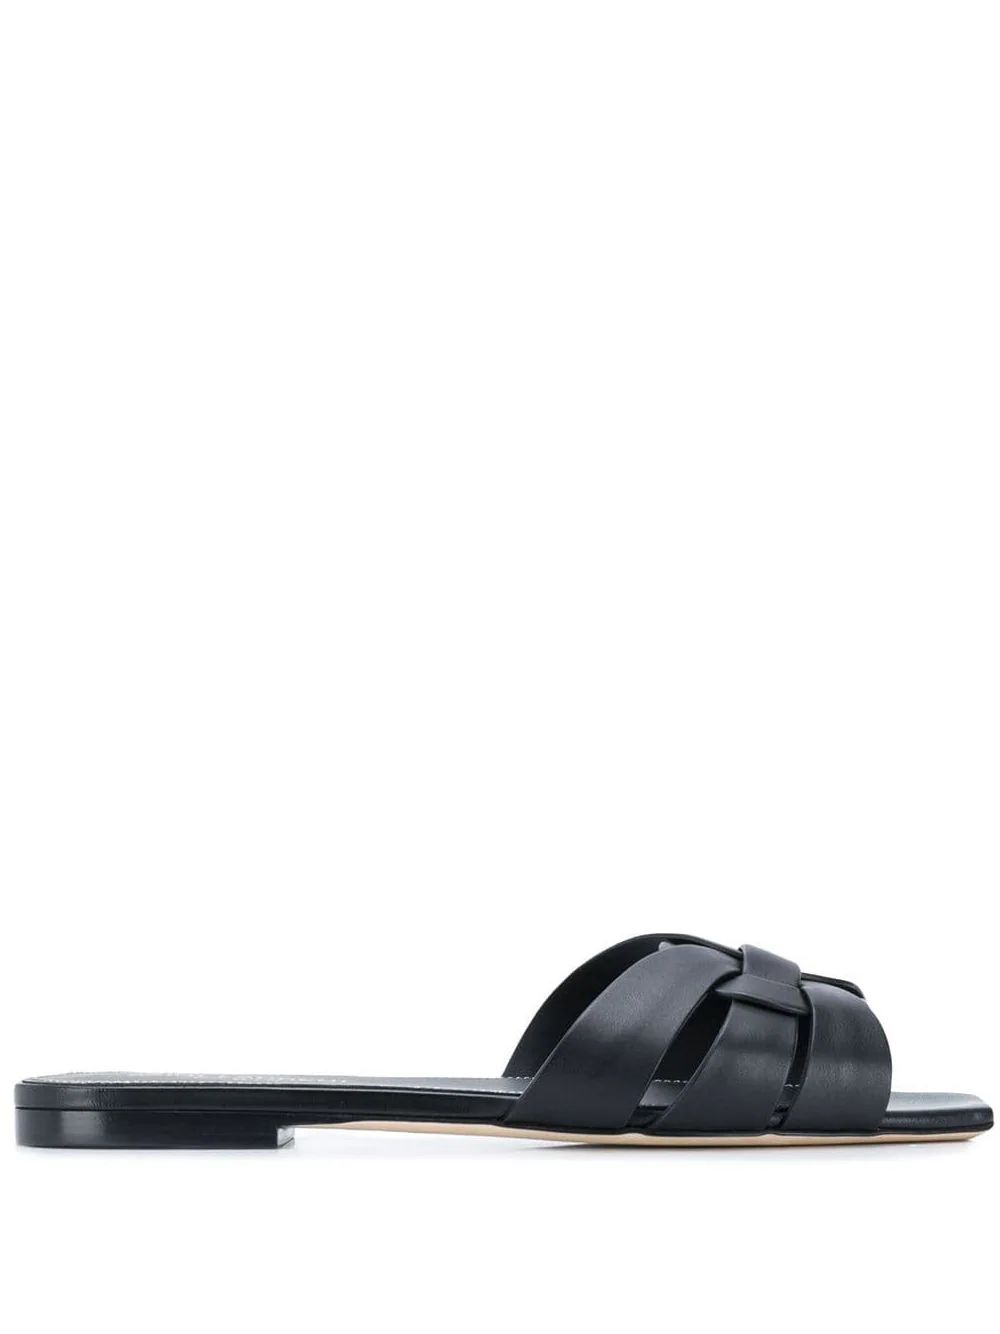 Tribute leather sandals | Farfetch Global